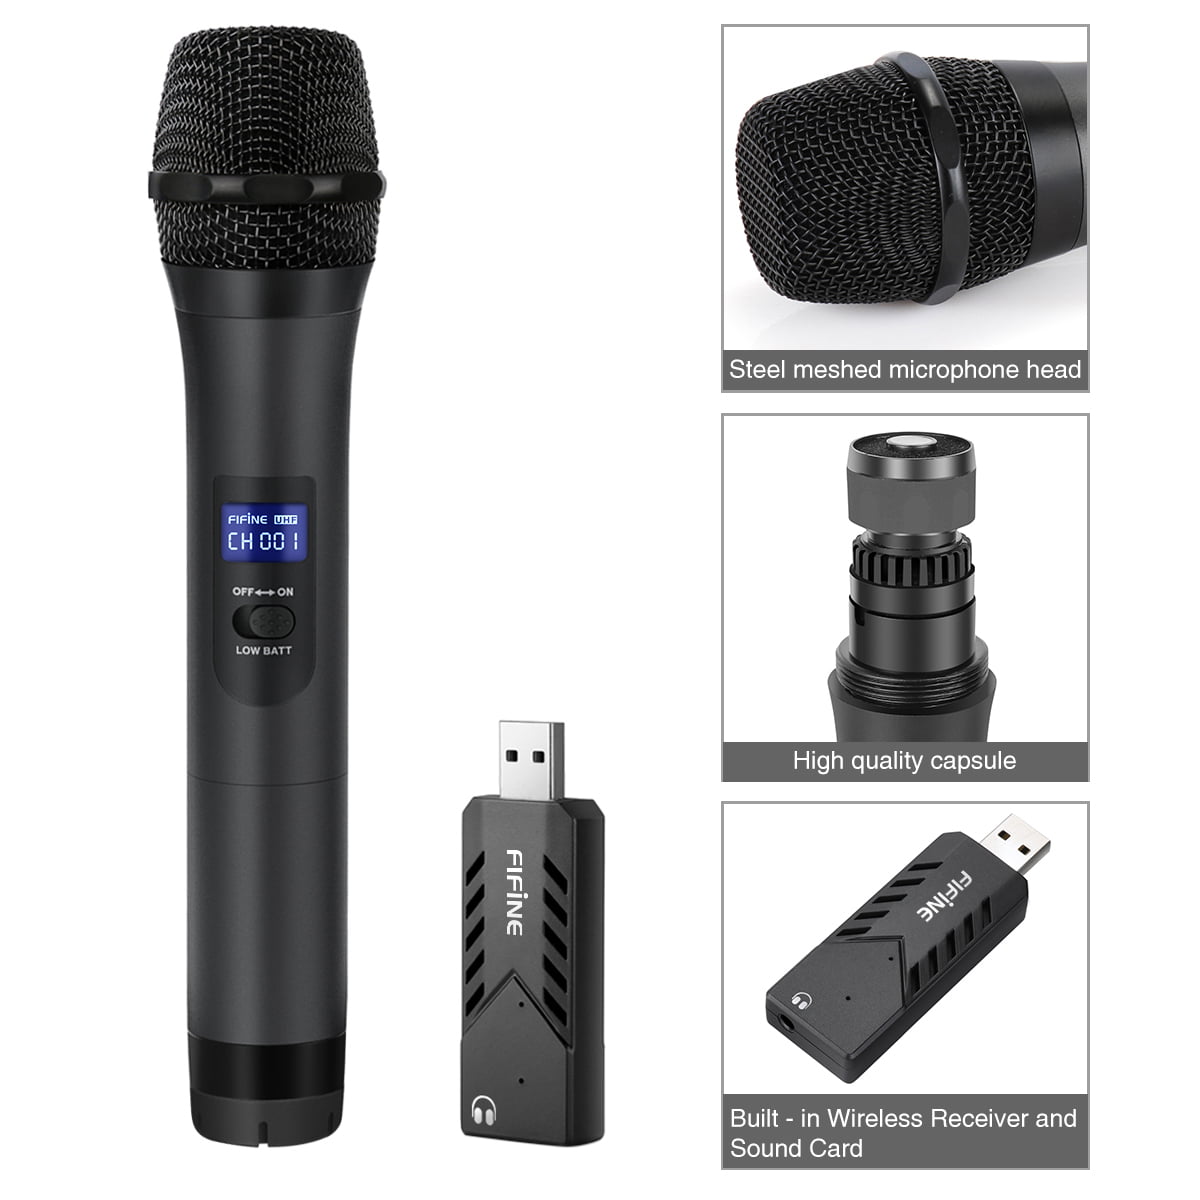 Fifine Wireless Microphone, USB Microphone,UHF Handheld Dynamic Microphone  with USB Receiver Output to Mac or PC For Singing,Podcasting and Recording  